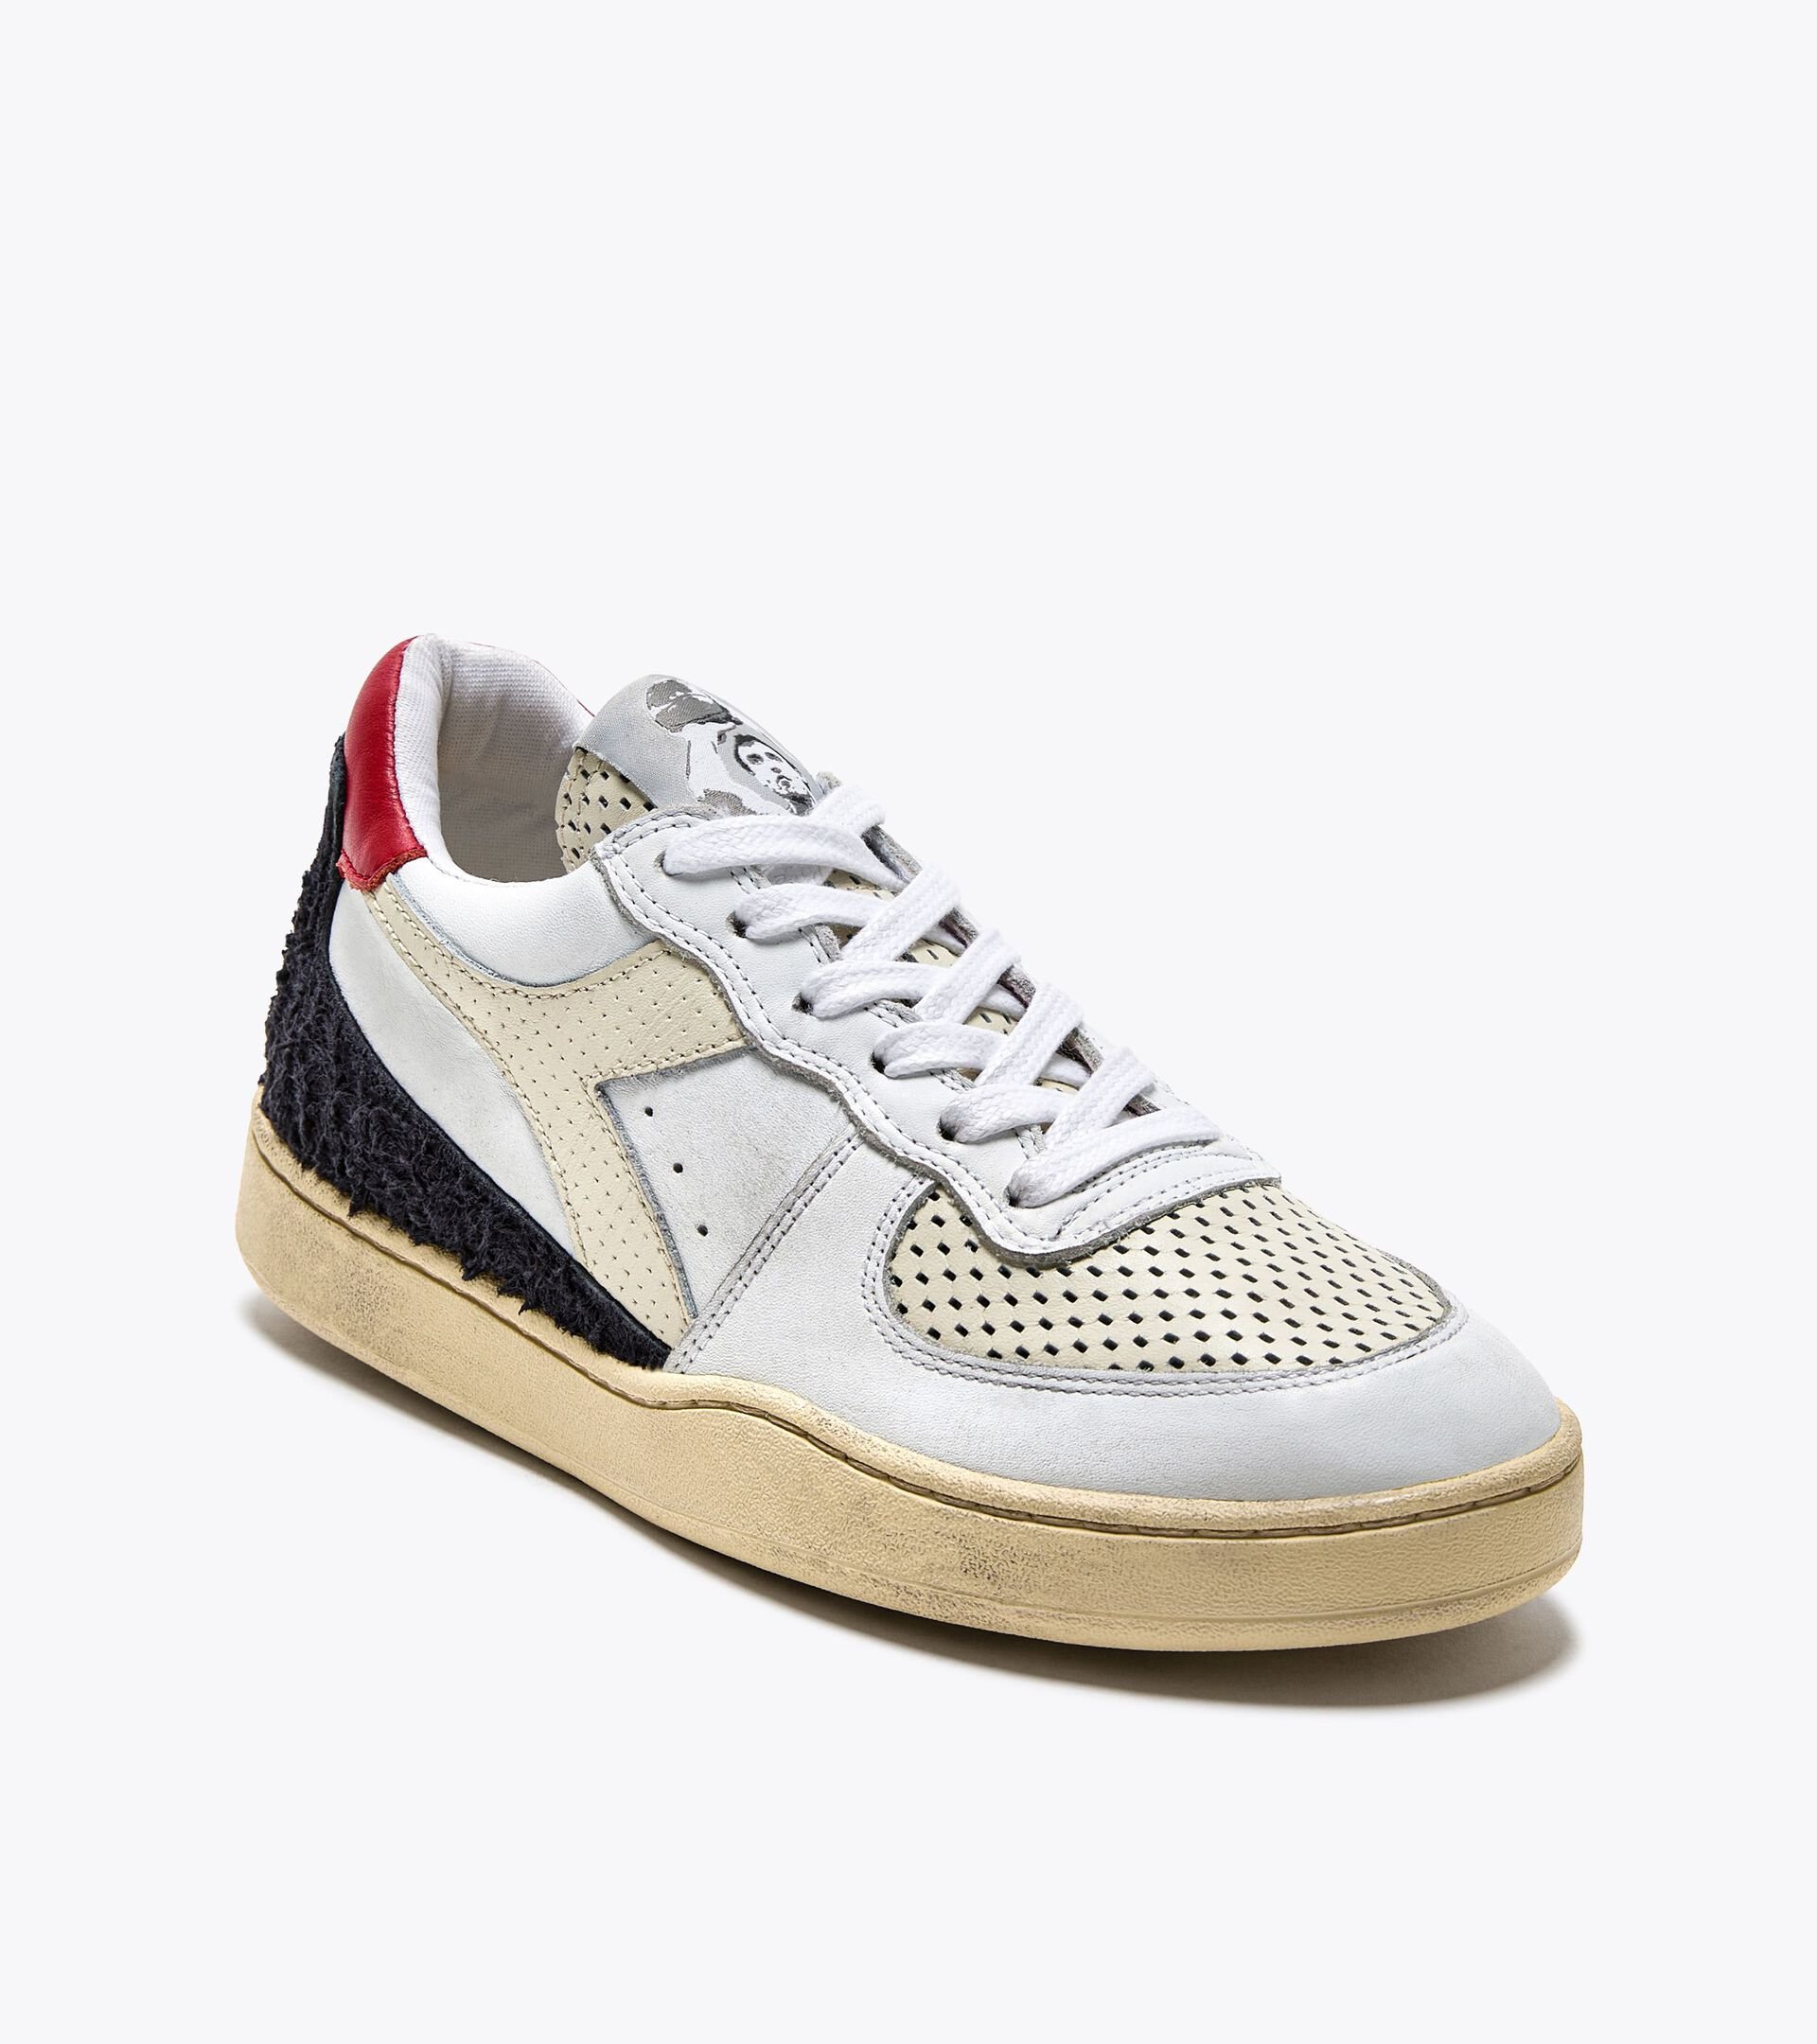 Chaussures Heritage - Made in Italy - Gender neutral MI BASKET LOW PUNCHED ITA X DINO MENEGHIN BLANCHE - Diadora